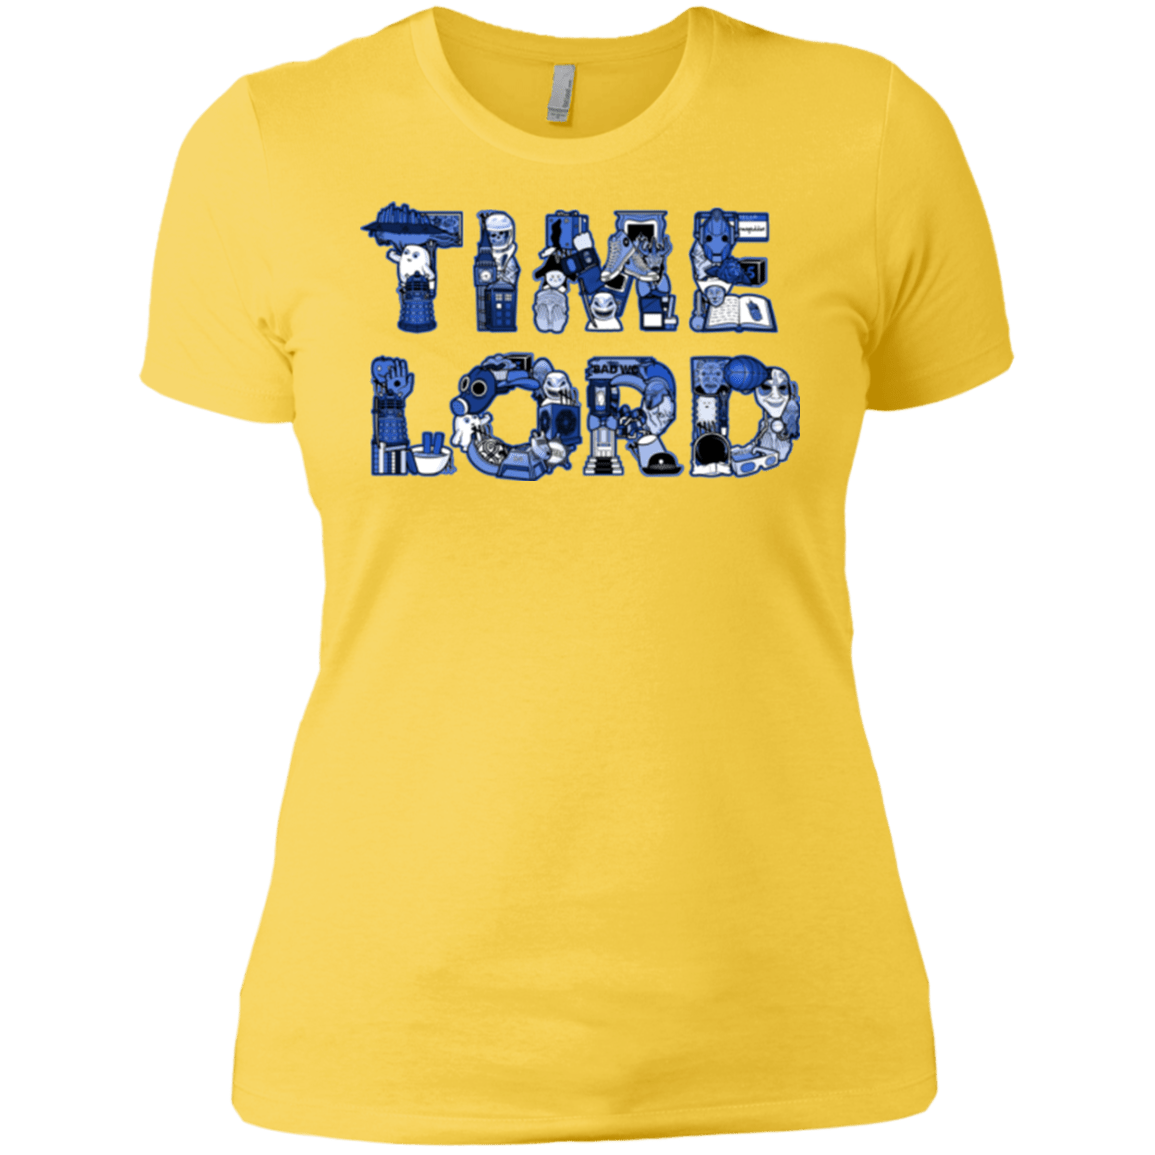 T-Shirts Vibrant Yellow / X-Small Timelord Women's Premium T-Shirt